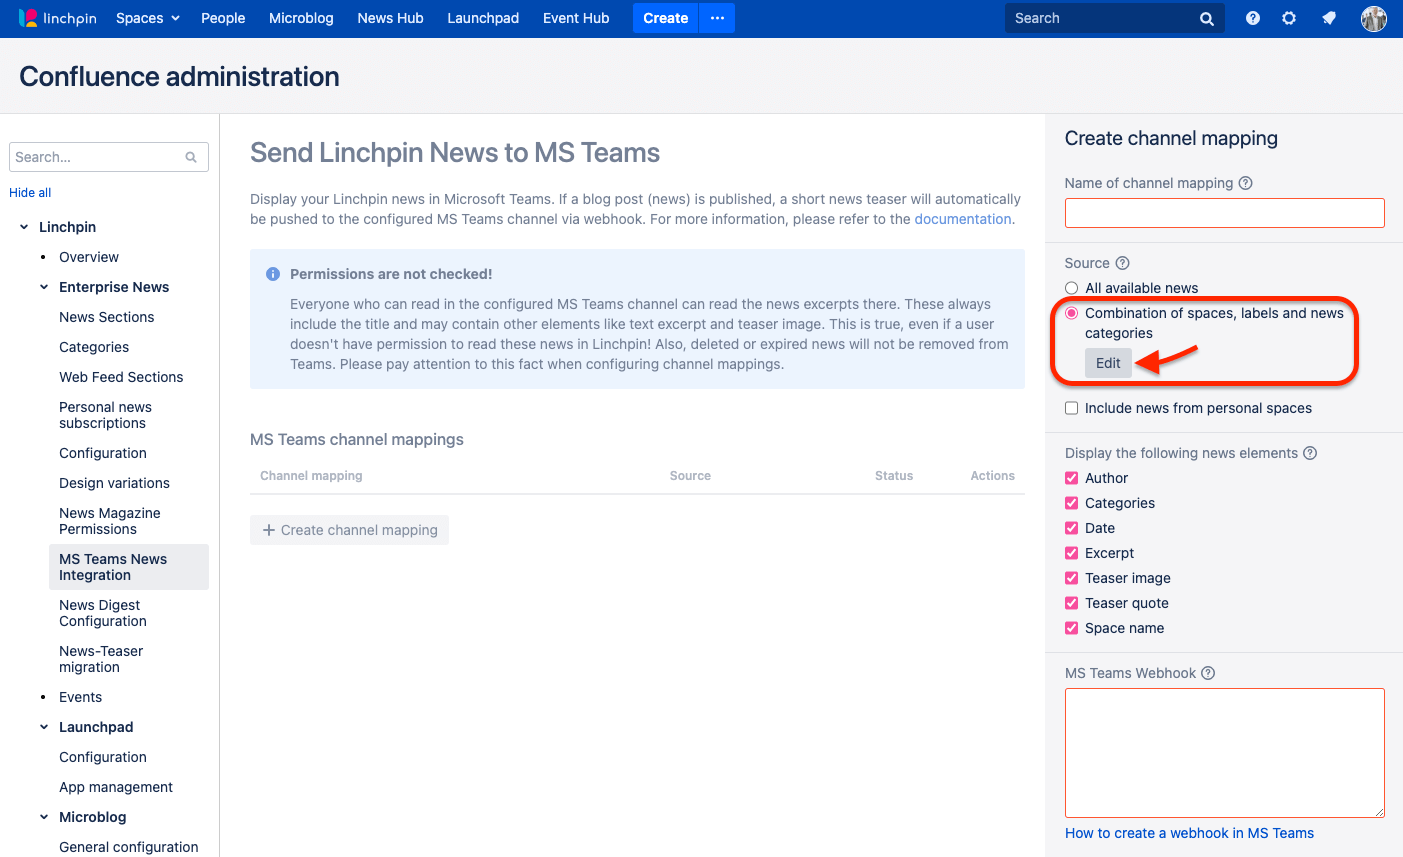 Microsoft Teams and Social Intranets - a Dream Team Thanks to Linchpin - linchpin news in ms teams - combination of spaces, labels and news categories option and edit button